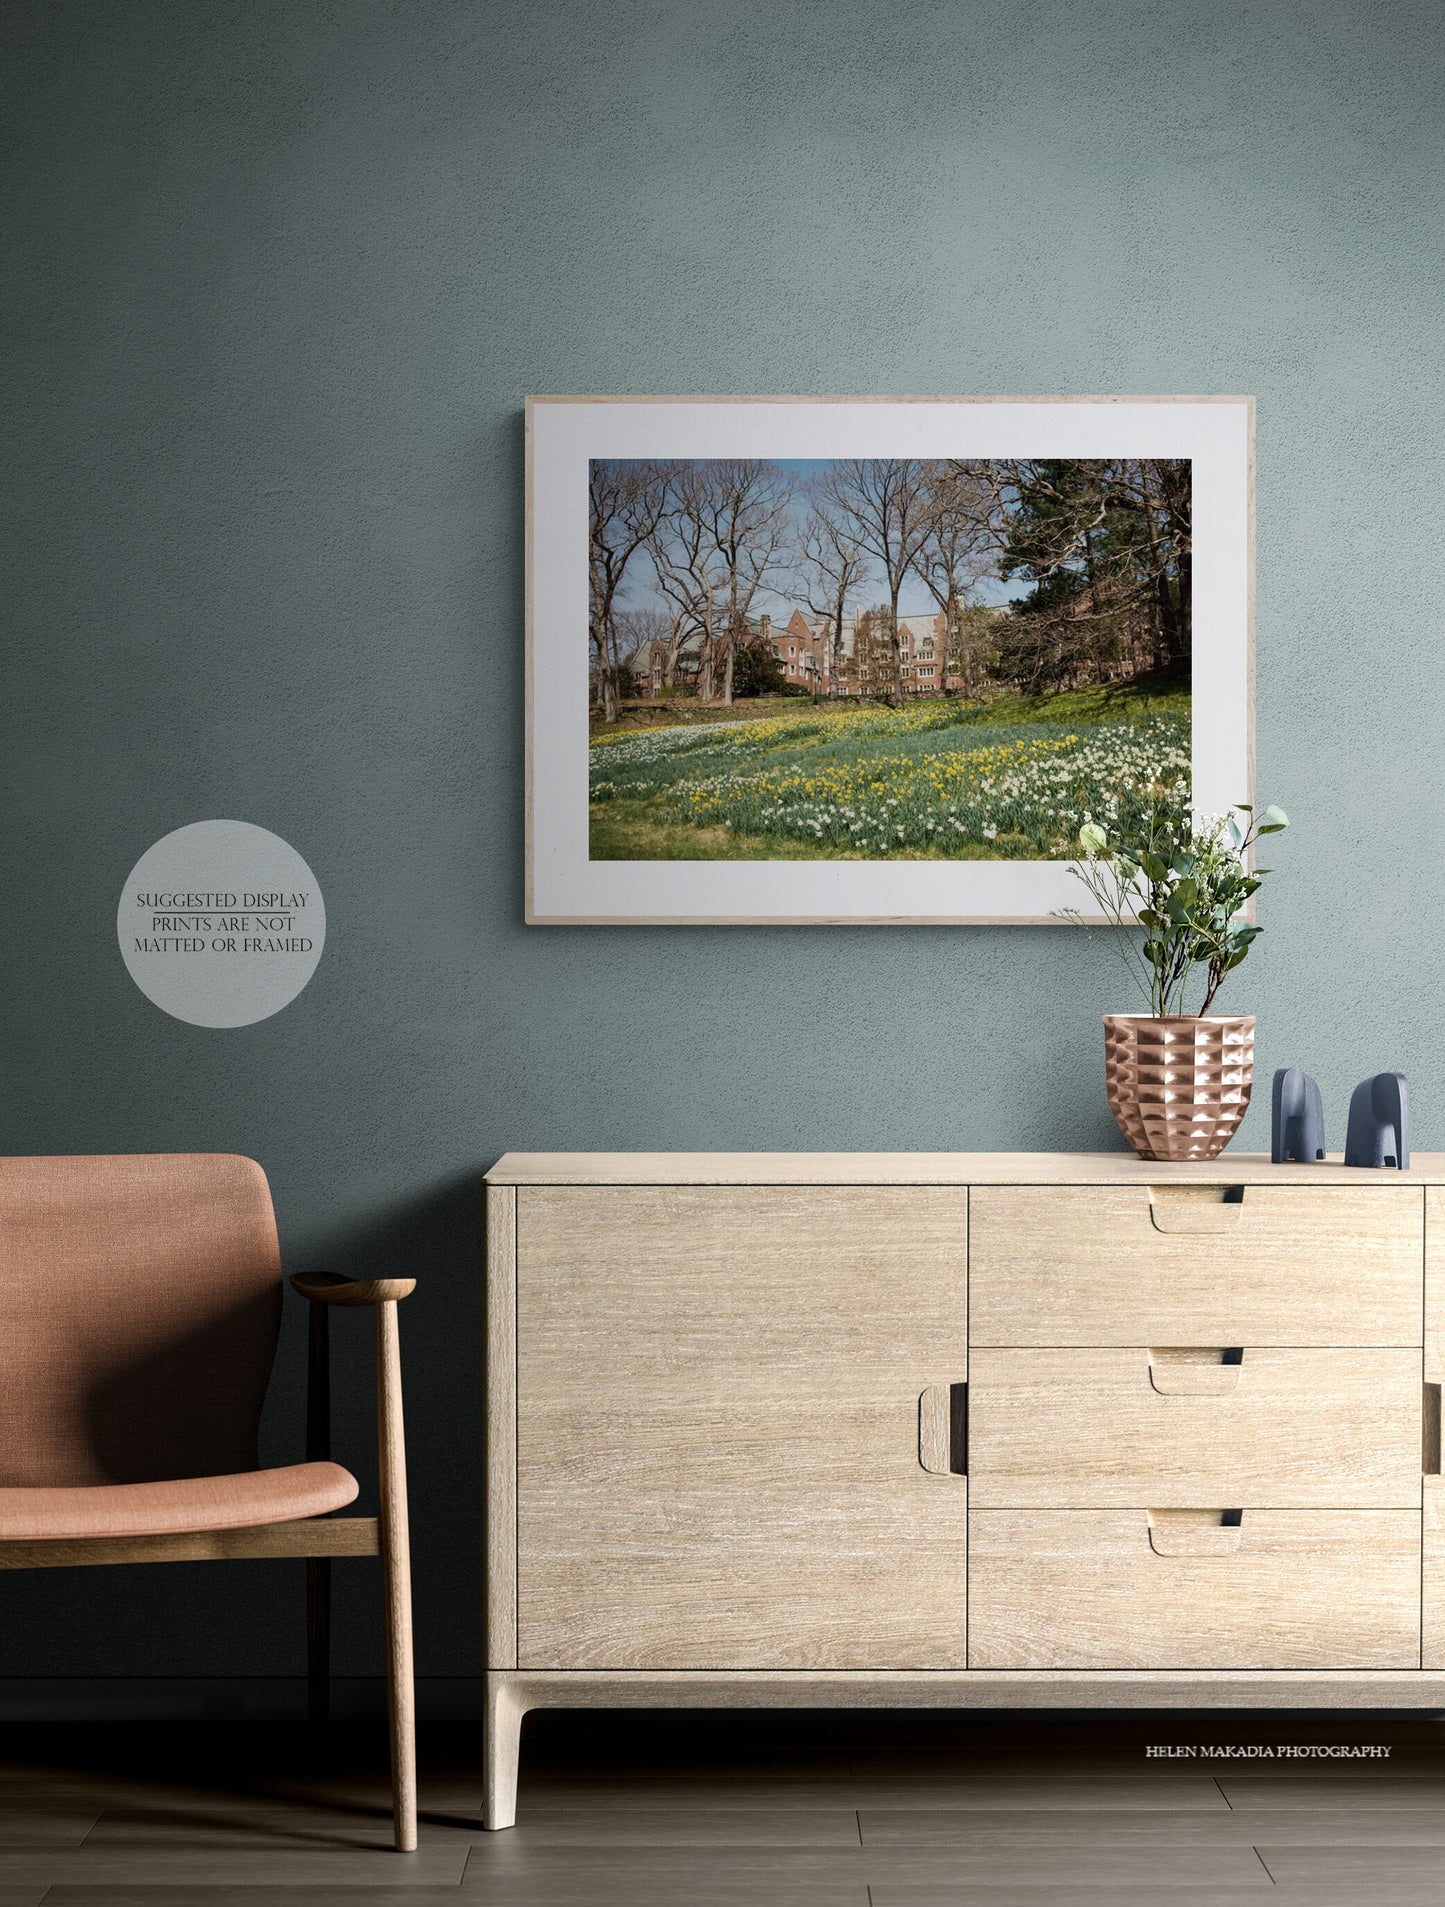 Daffodil Hill and Stone Davis at Wellesley College Photograph as Framed Wall Art in an entryway